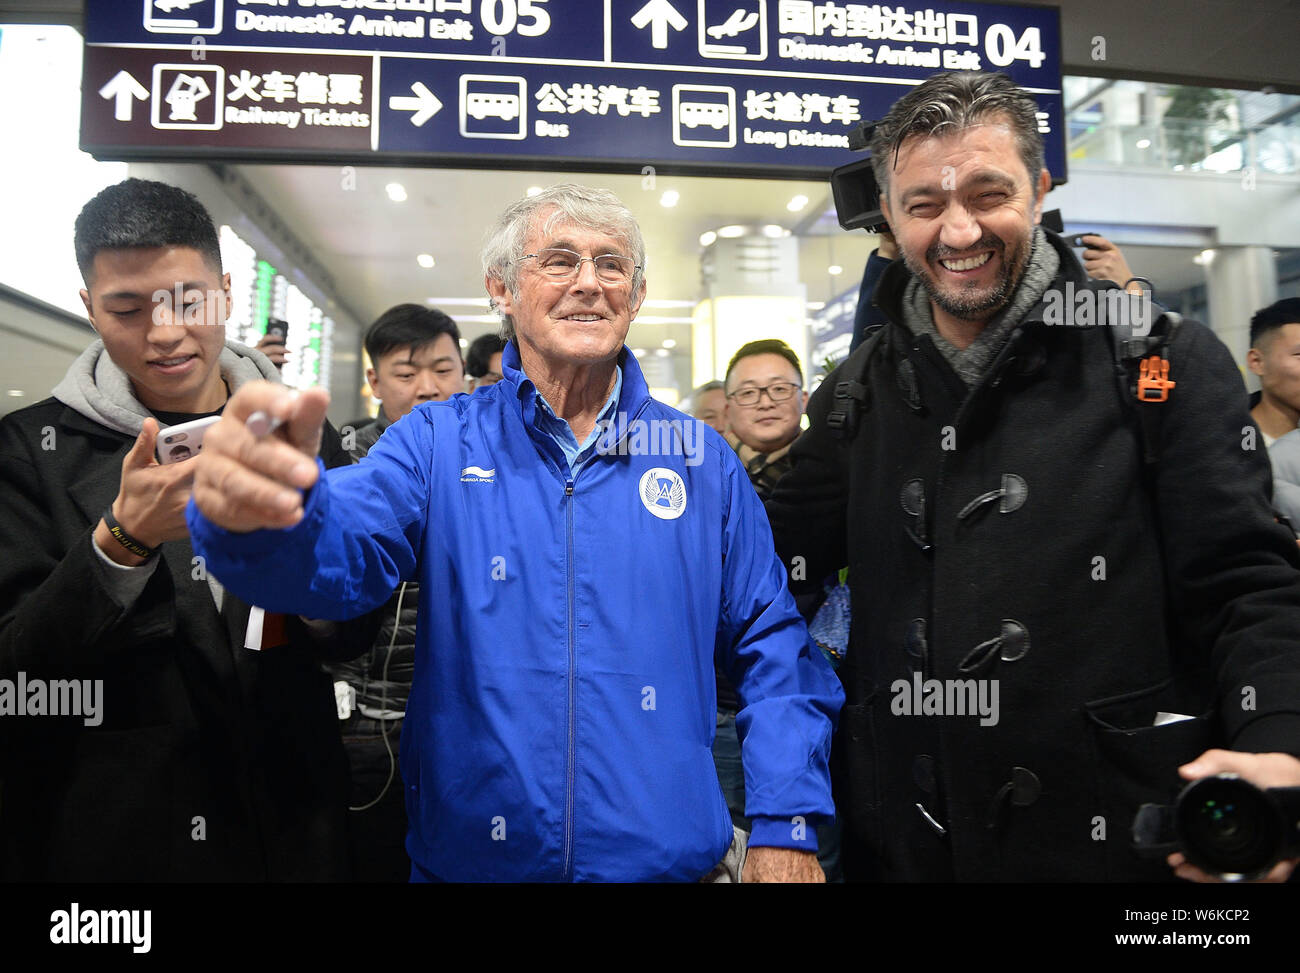 Serbian football coach and former player Bora Milutinovic, center, is surrounded by fans as he arrives at the Chengdu Shuangliu International Airport Stock Photo